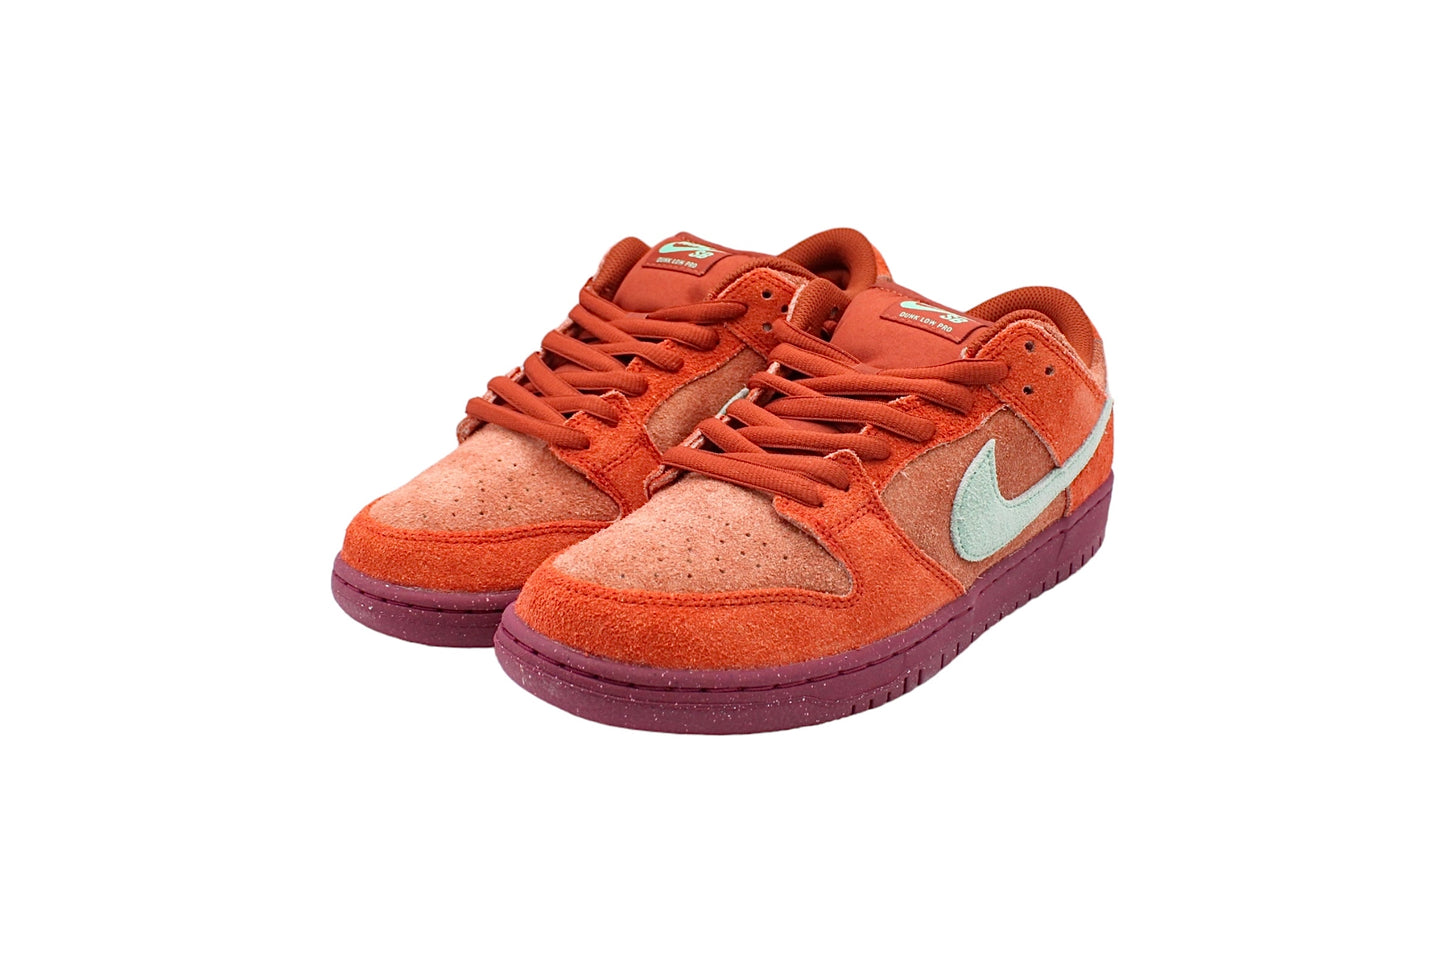 Nike SB Dunk Low Pro ‘Mystic Red Rosewood’